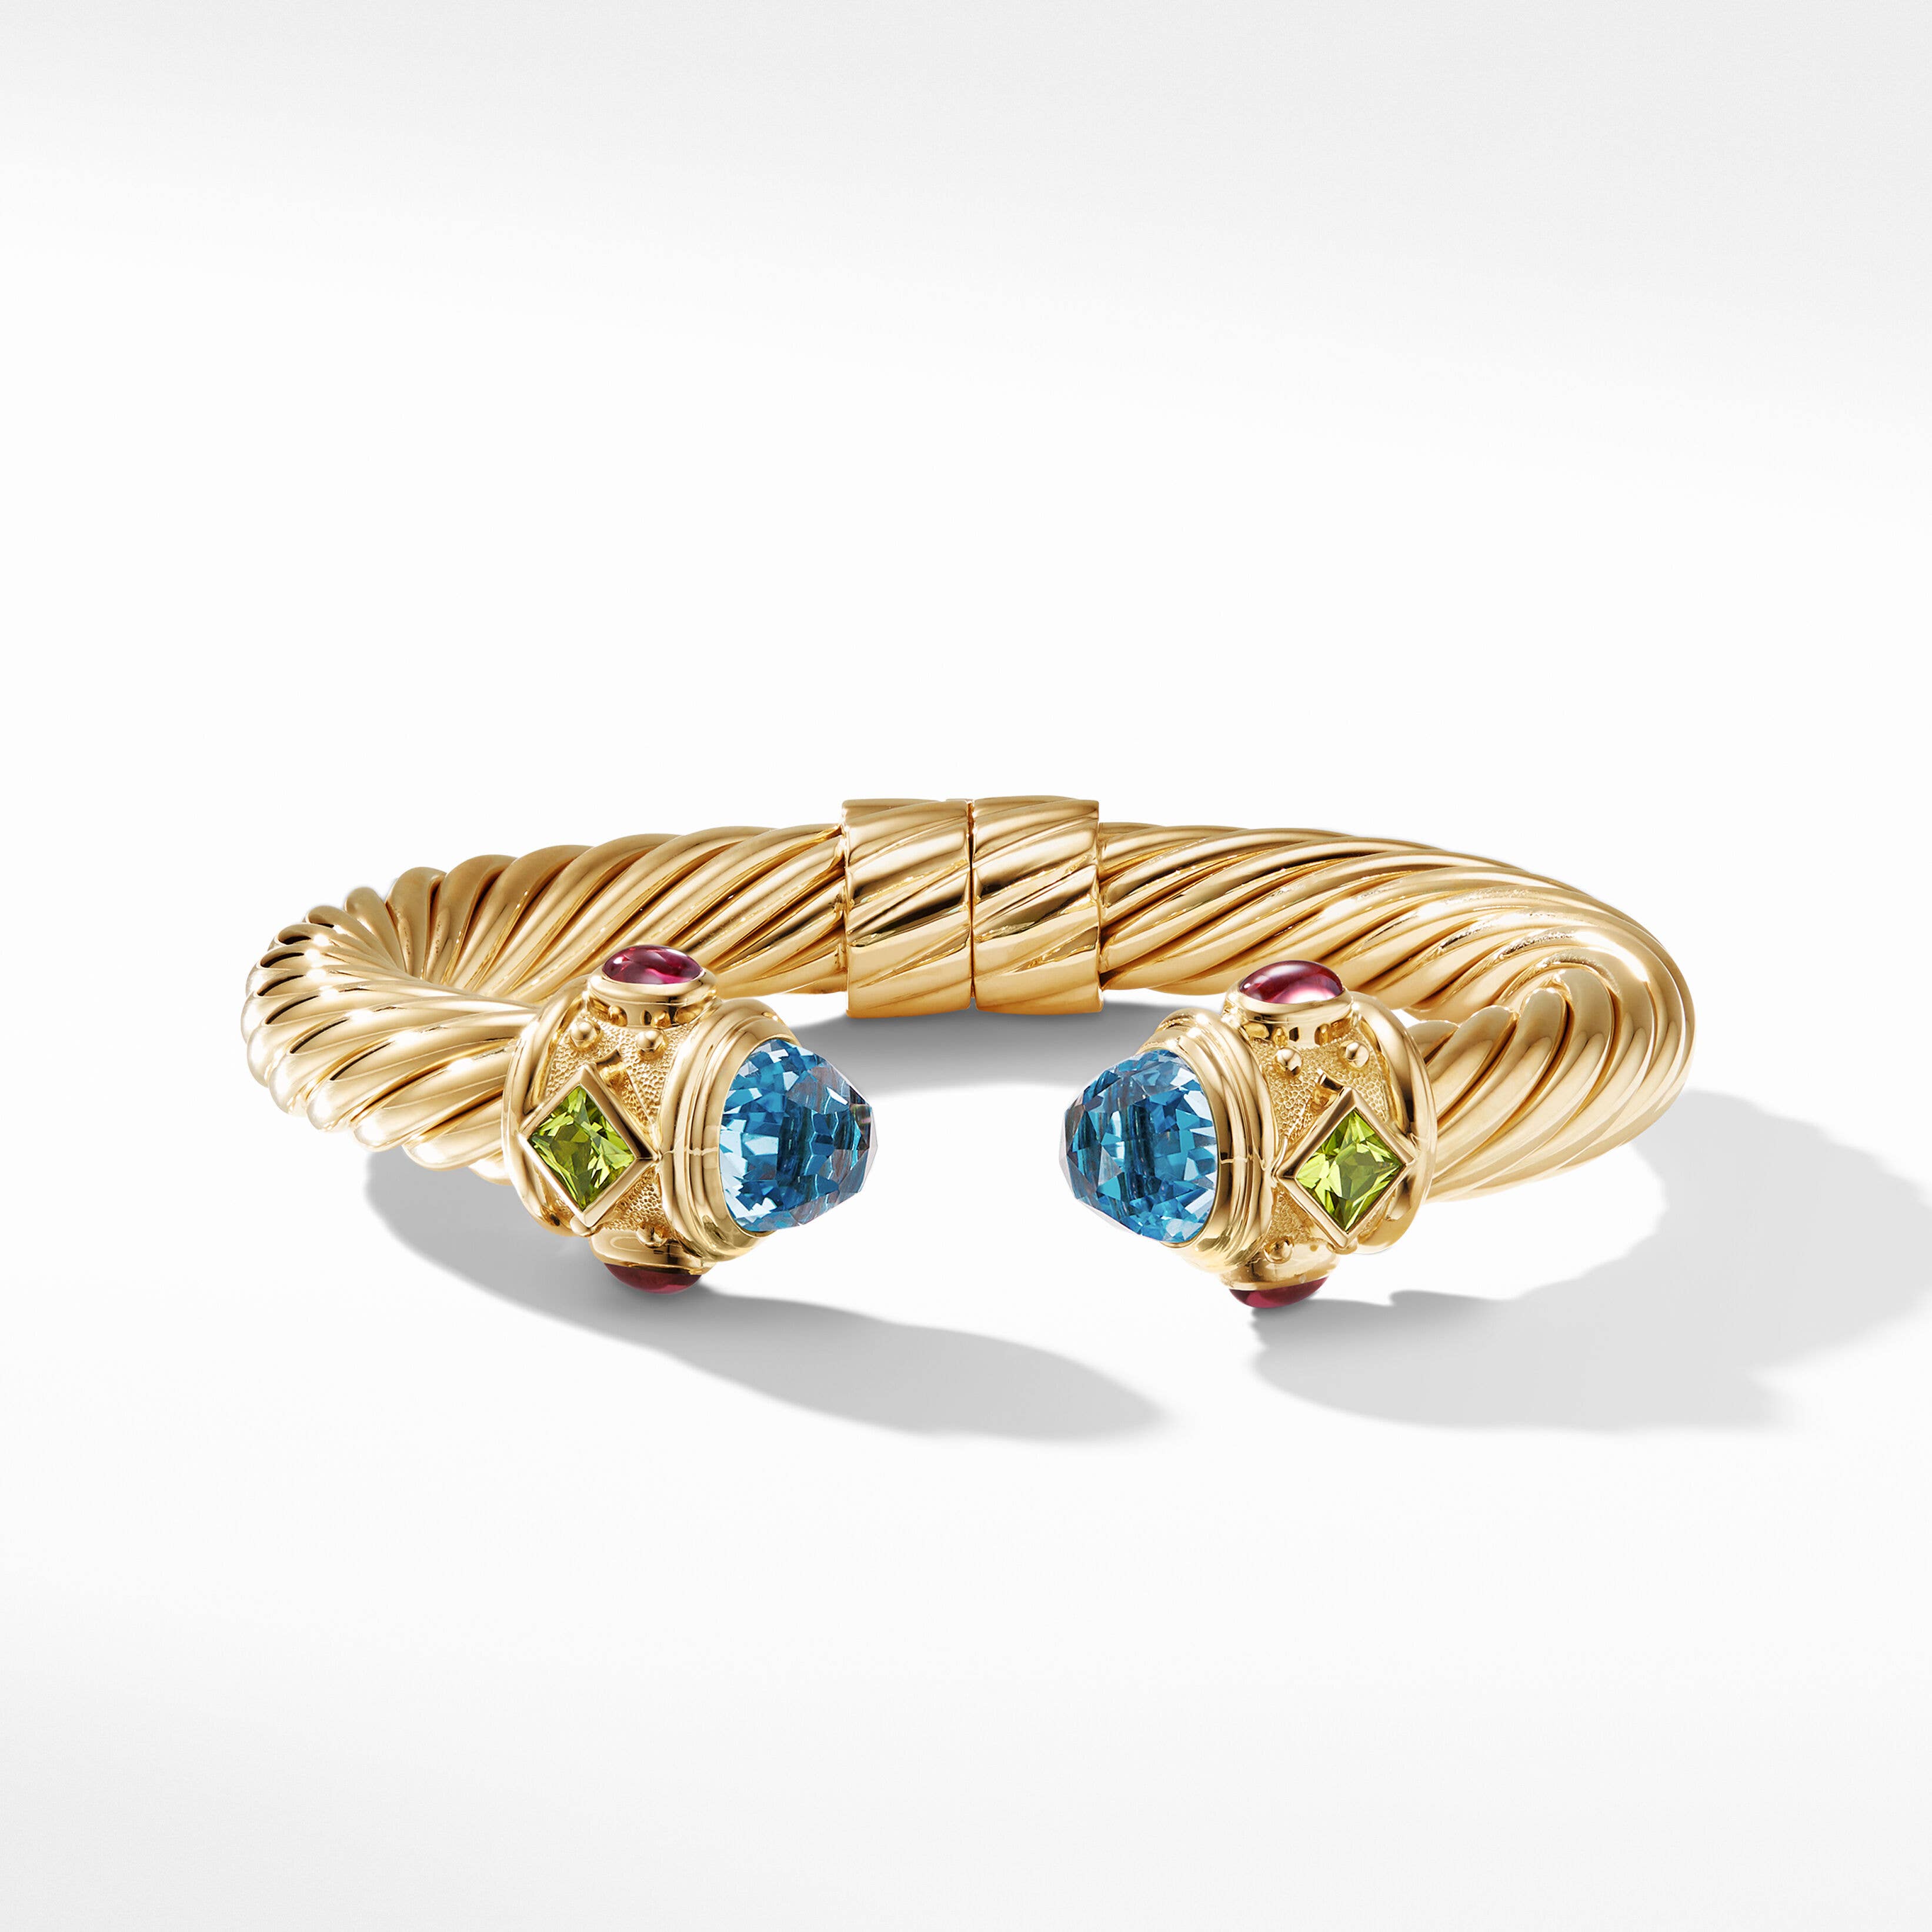 Renaissance Color Bracelet in 18K Yellow Gold with Blue Topaz, Peridot and Pink Tourmaline